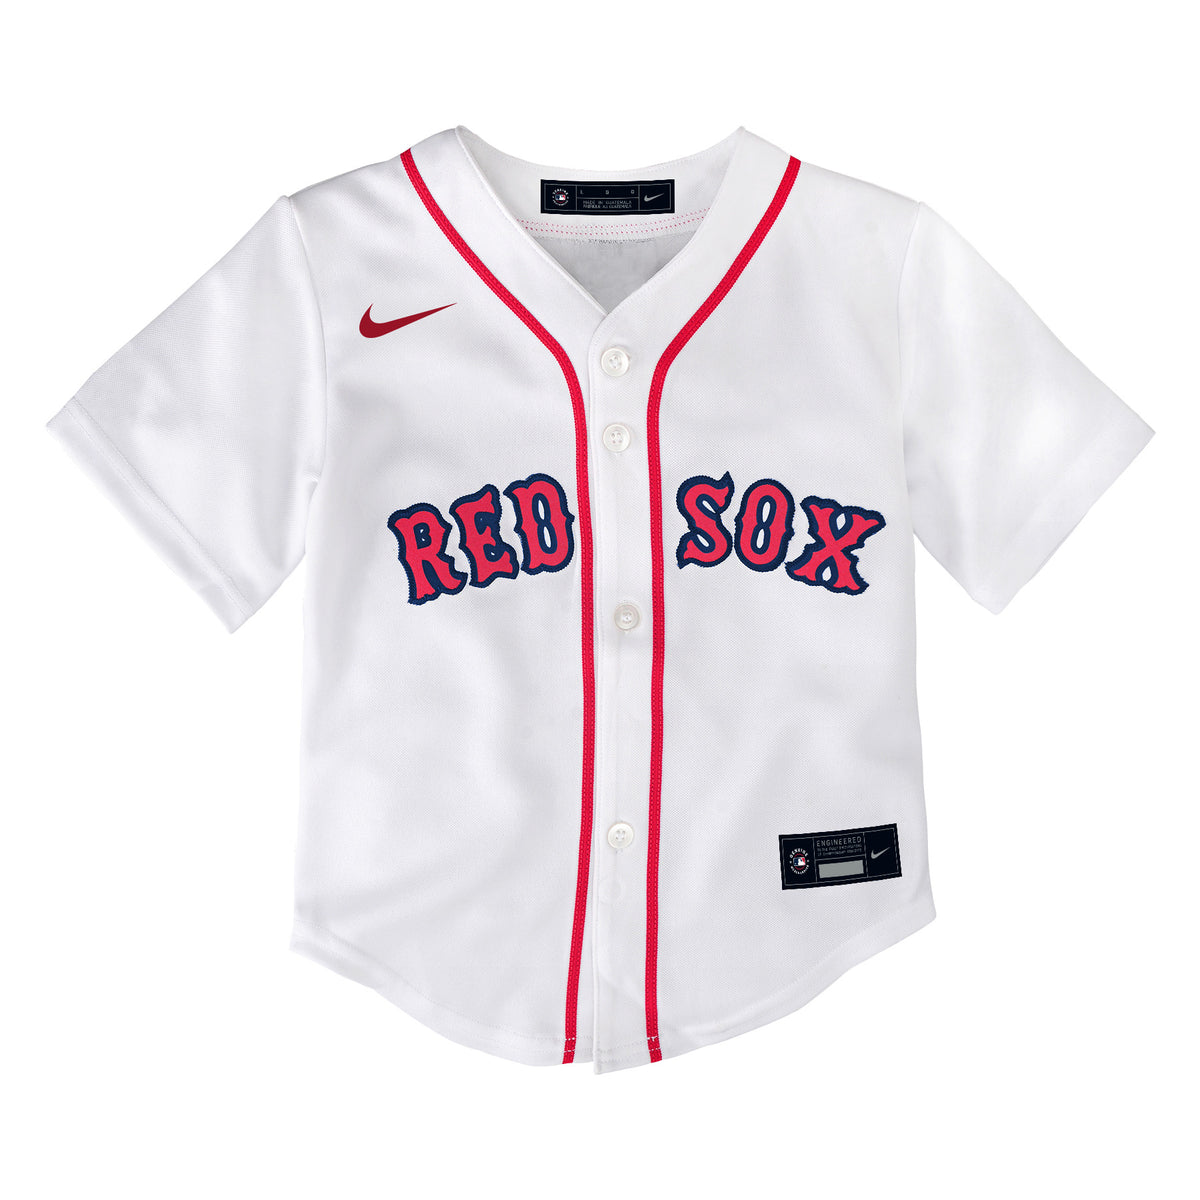  Boston Red Sox Youth Large MLB Licensed Replica Jersey